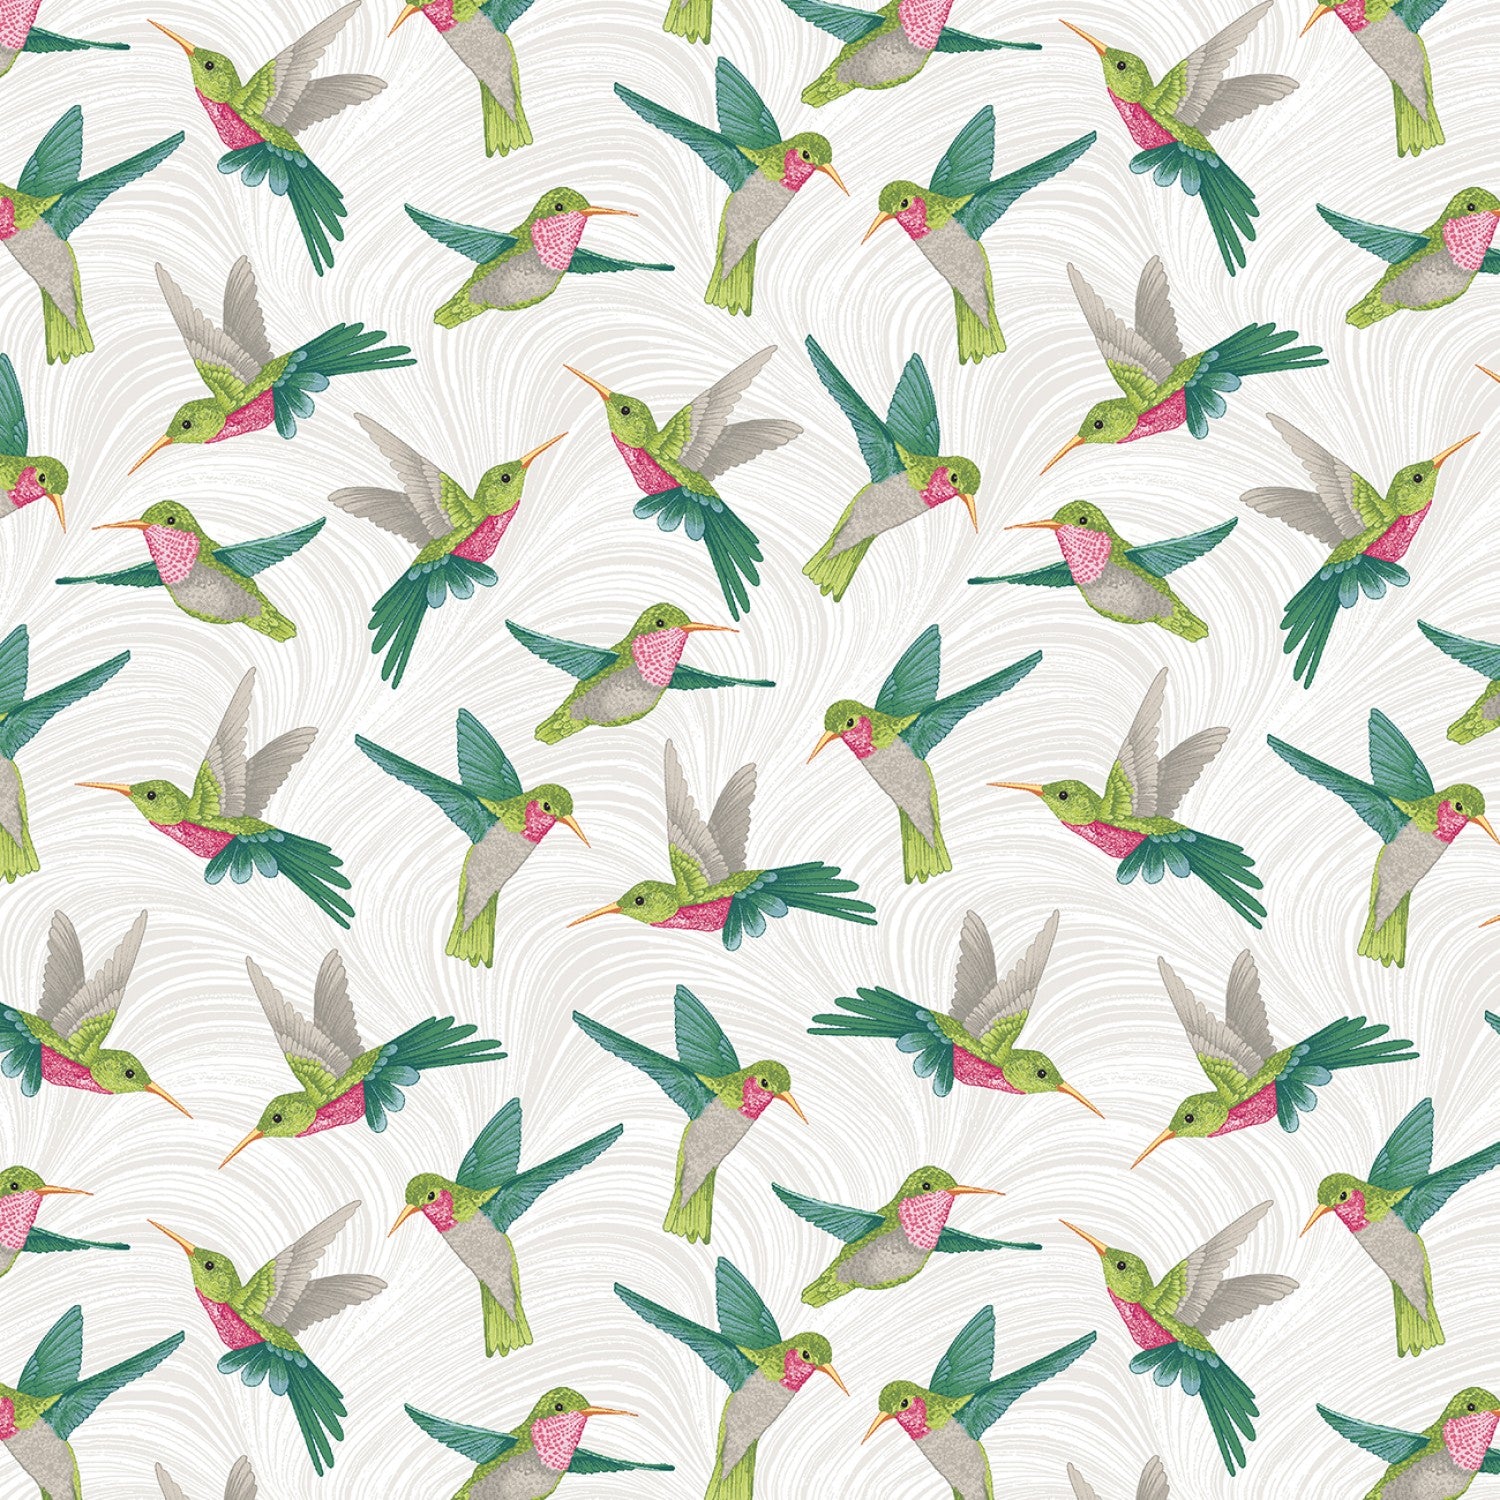 White Hummingbird & Wave from the Hummingbirds & Honeysuckle Collection for Benartex Sold by the Half Yard